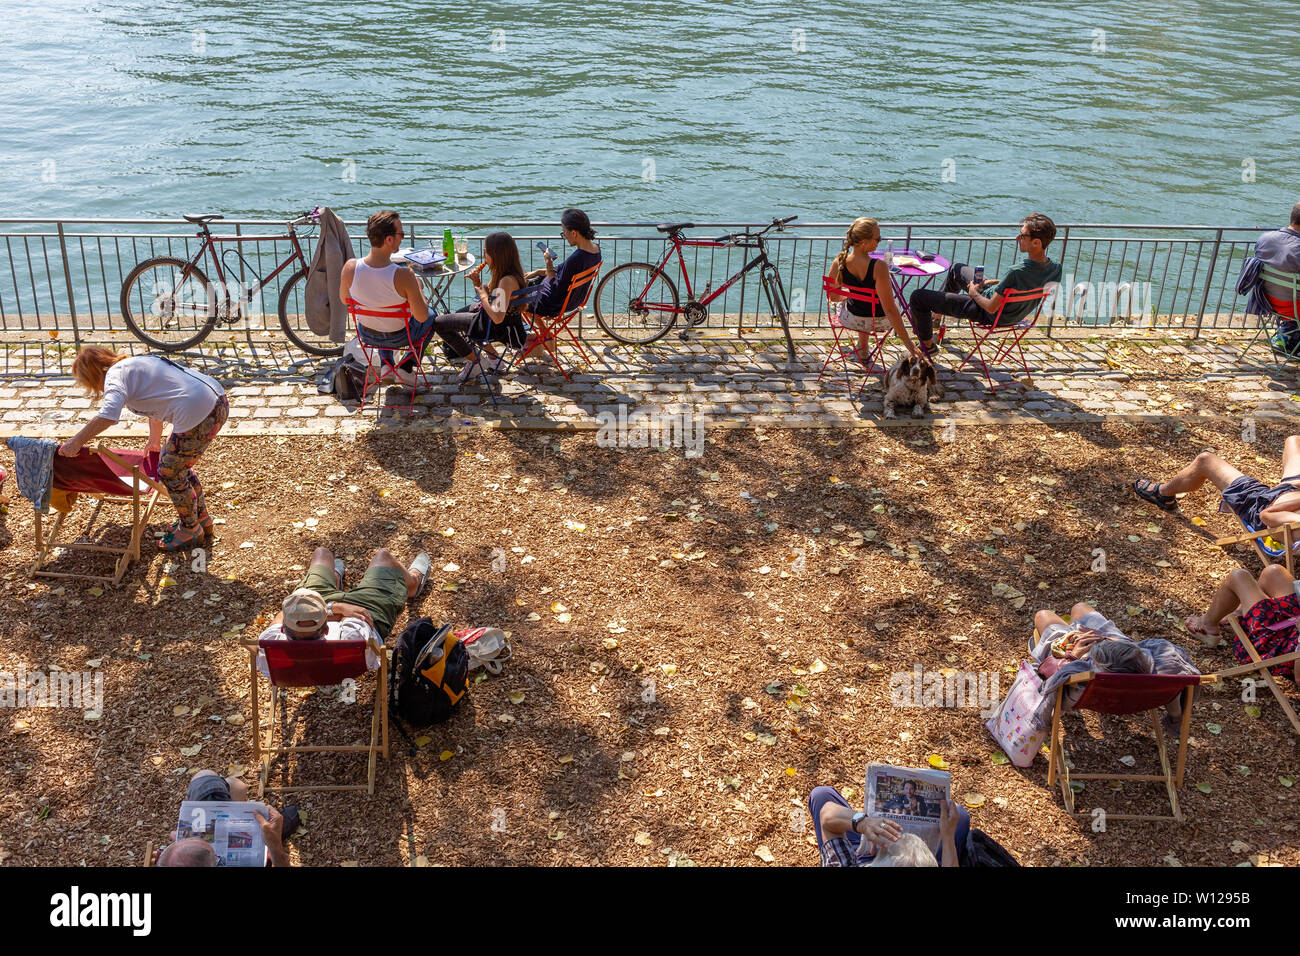 Paris, France - September 2, 2018: people from Paris enjoying a hot summer day at the Seine River margins Stock Photo